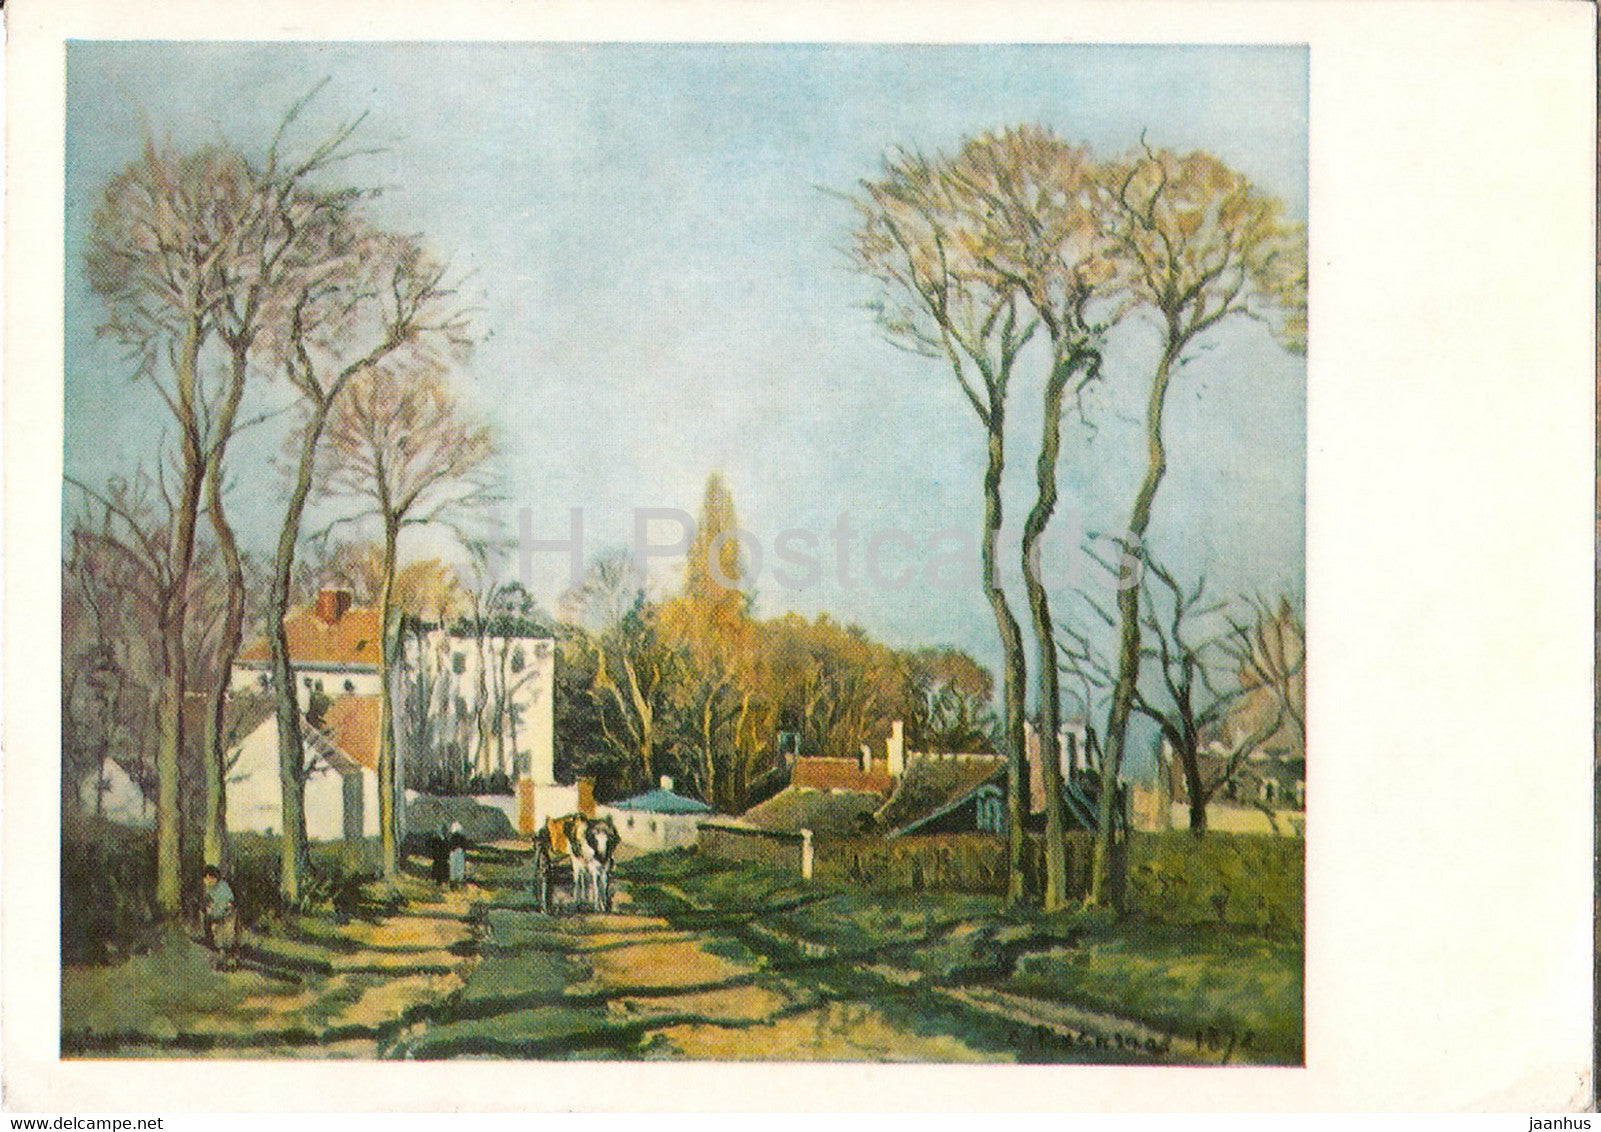 painting by Camille Pissarro - Weg in ein Dorf - The lane through the village - French art - Germany DDR - unused - JH Postcards